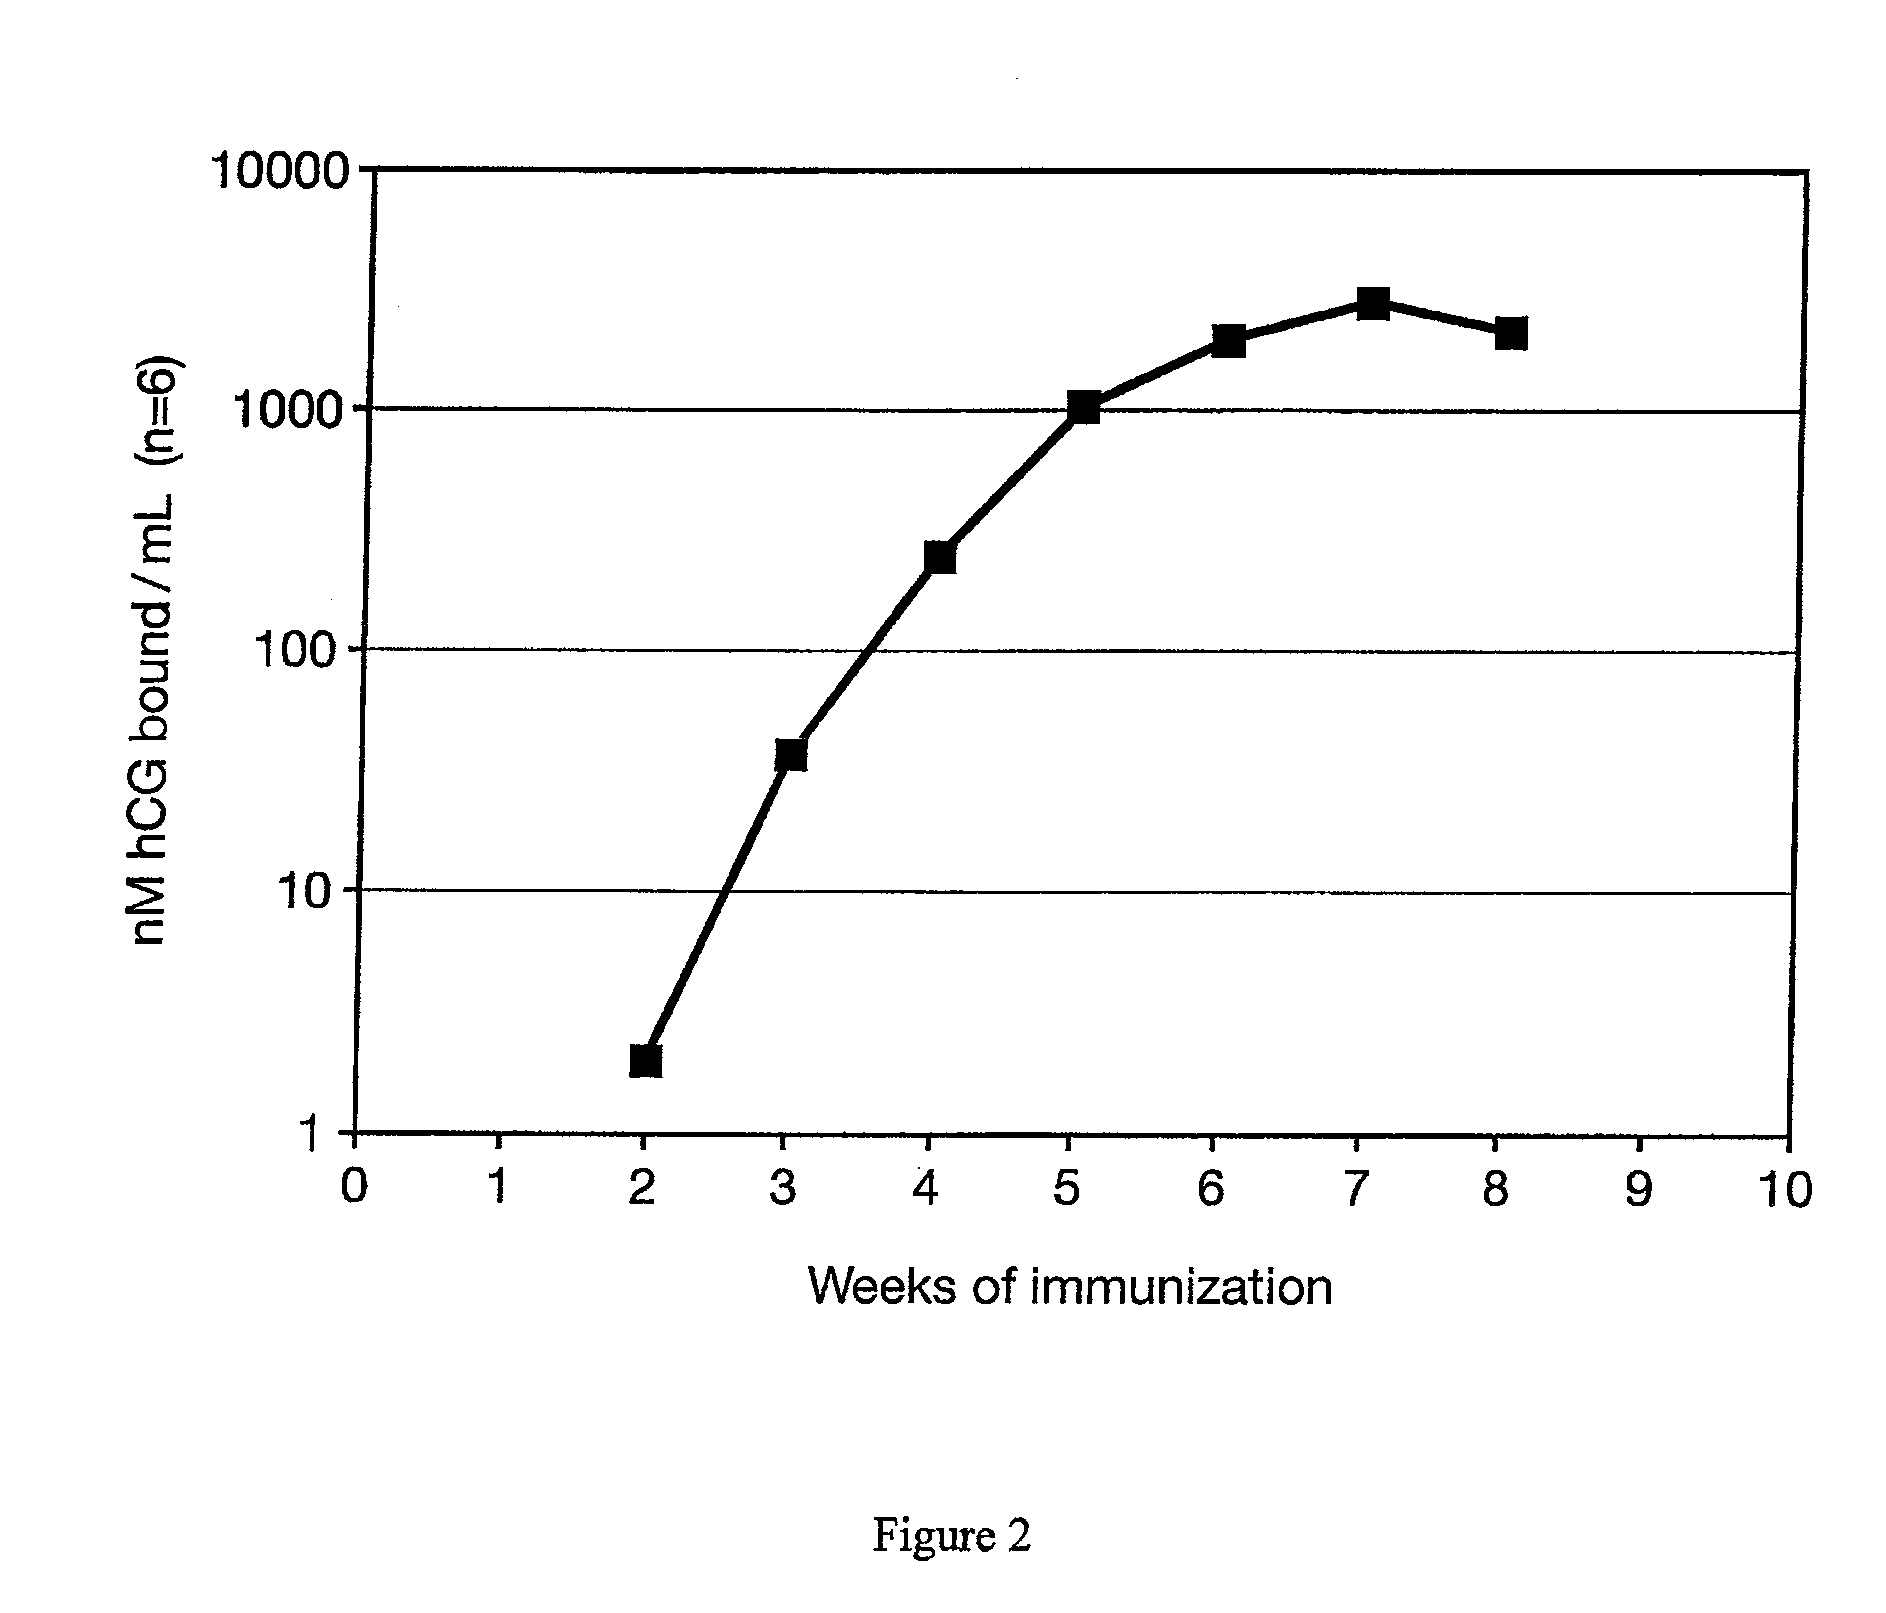 METHOD FOR DELIVERING A HUMAN CHORIONIC GONADOTROPIN (Hcg) VACCINE FOR LONG-ACTING ANTIBODY PROTECTION